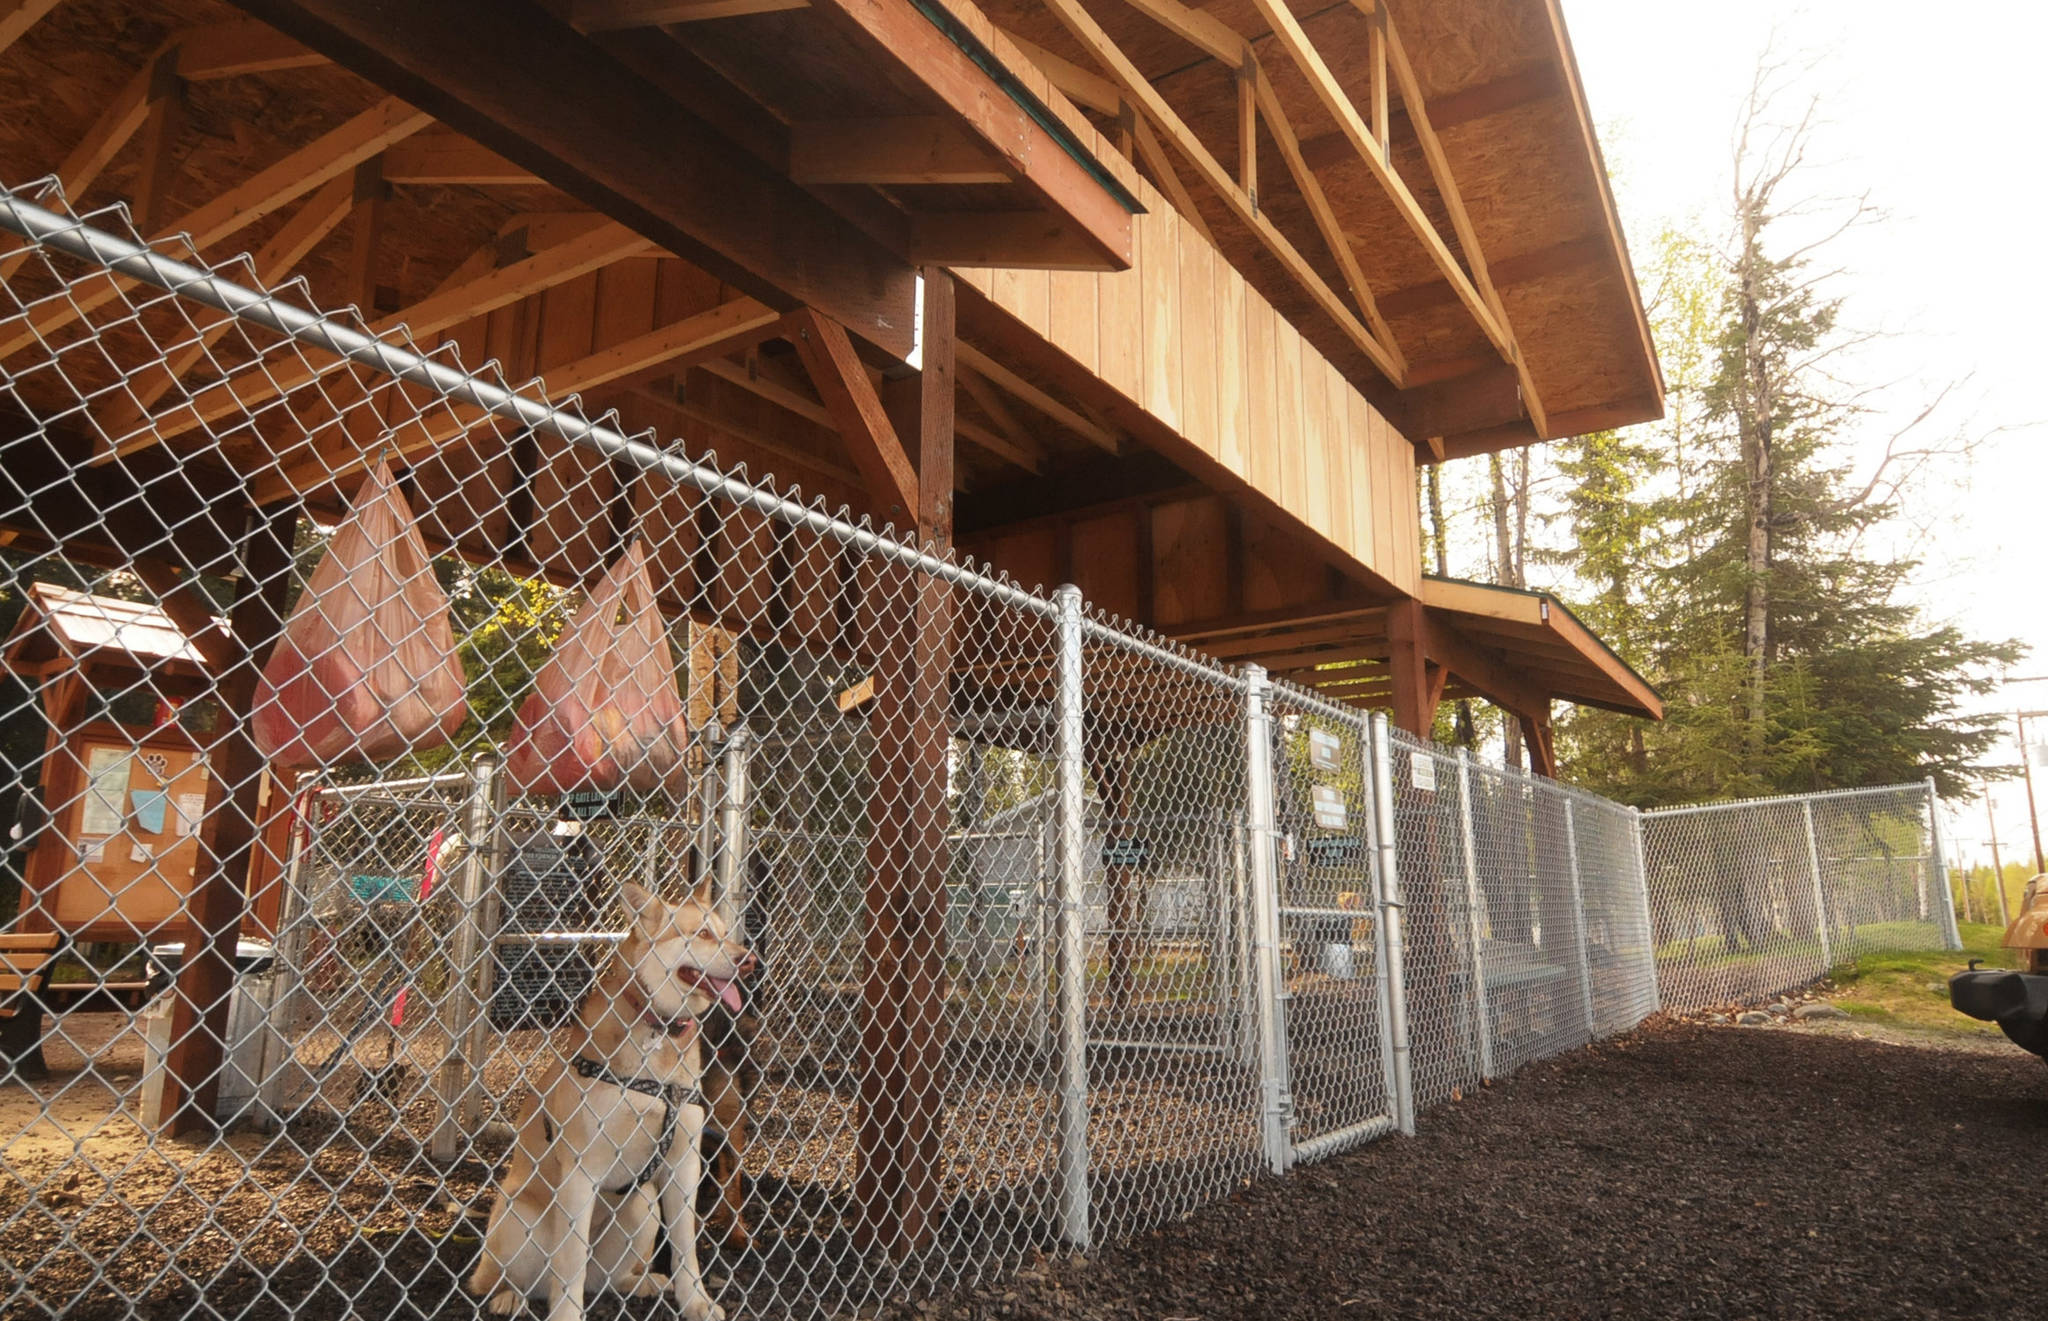 A dog keeps watch for new visitors to the 3 Friends Dog Park on Monday, May 23, 2018 in Soldotna, Alaska. (Photo by Elizabeth Earl/Peninsula Clarion)